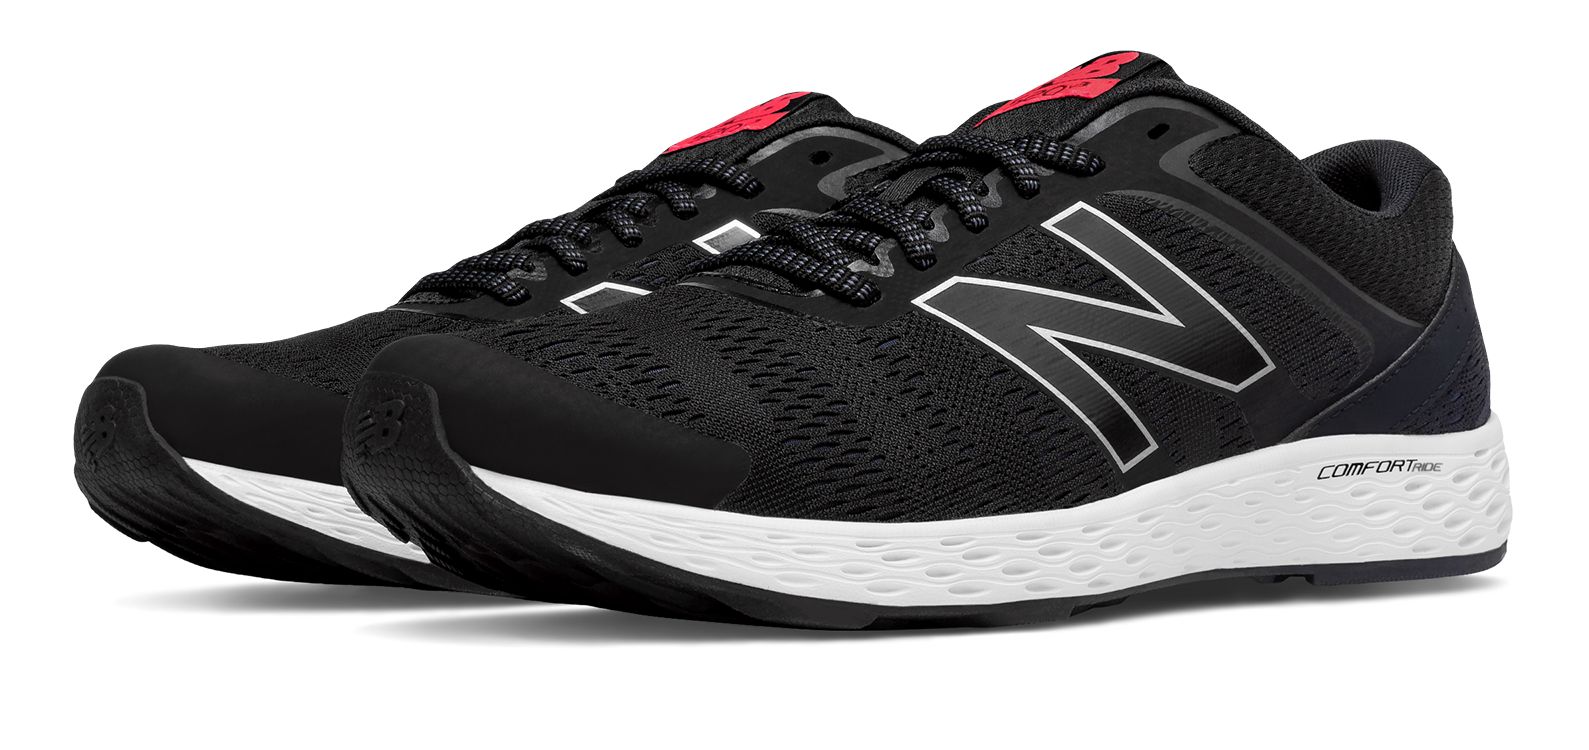 New Balance M520-V3 on Sale - Discounts Up to 57% Off on M520LC3 at Joe's New  Balance Outlet